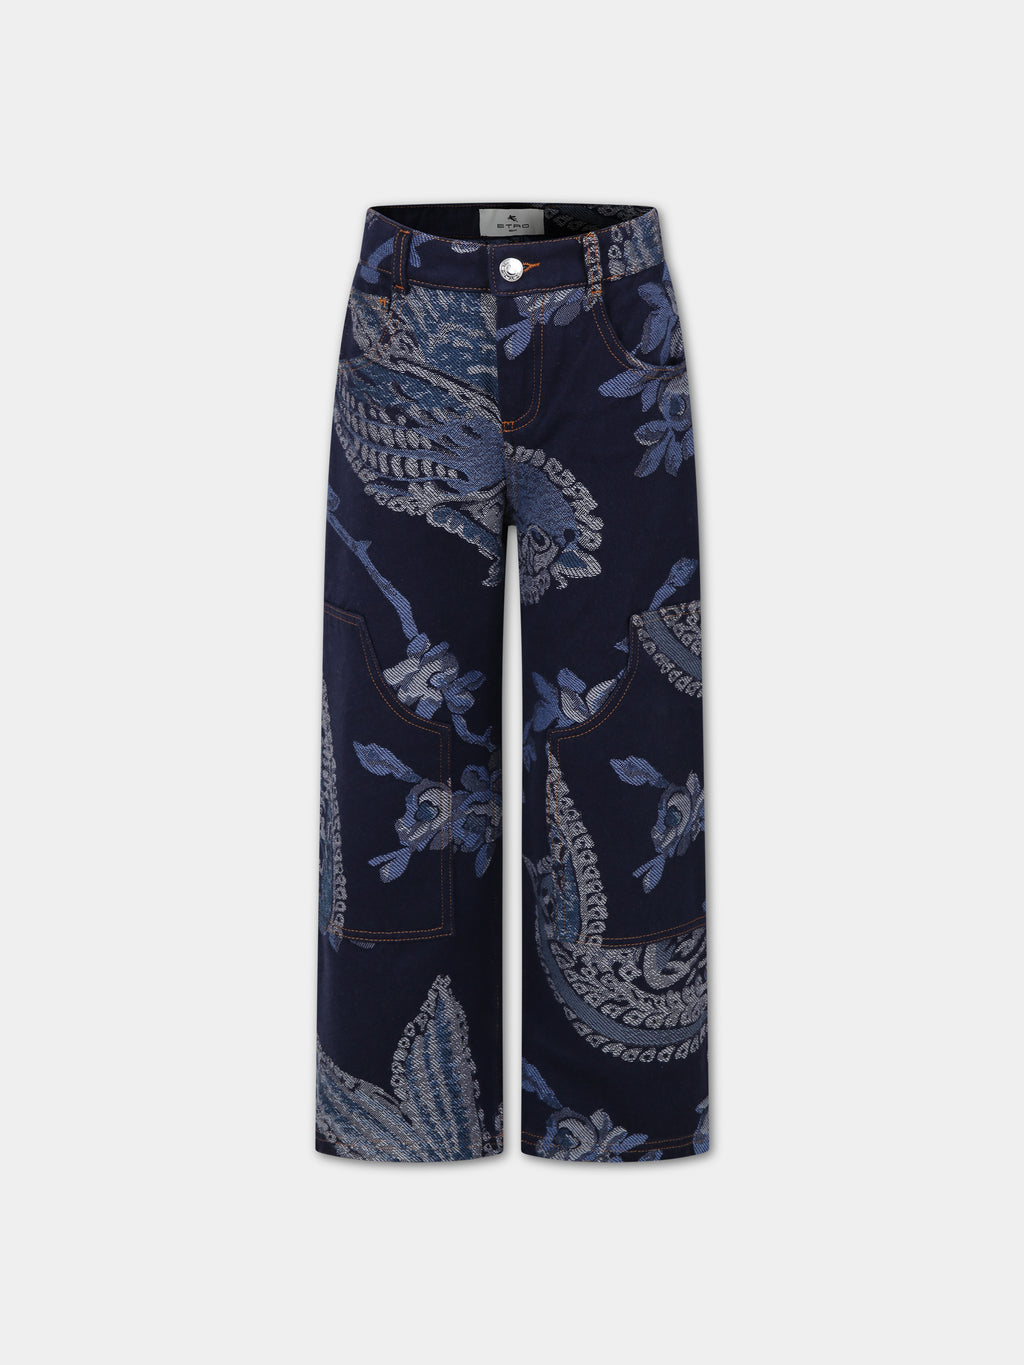 Denim jeans for kids with paisley pattern